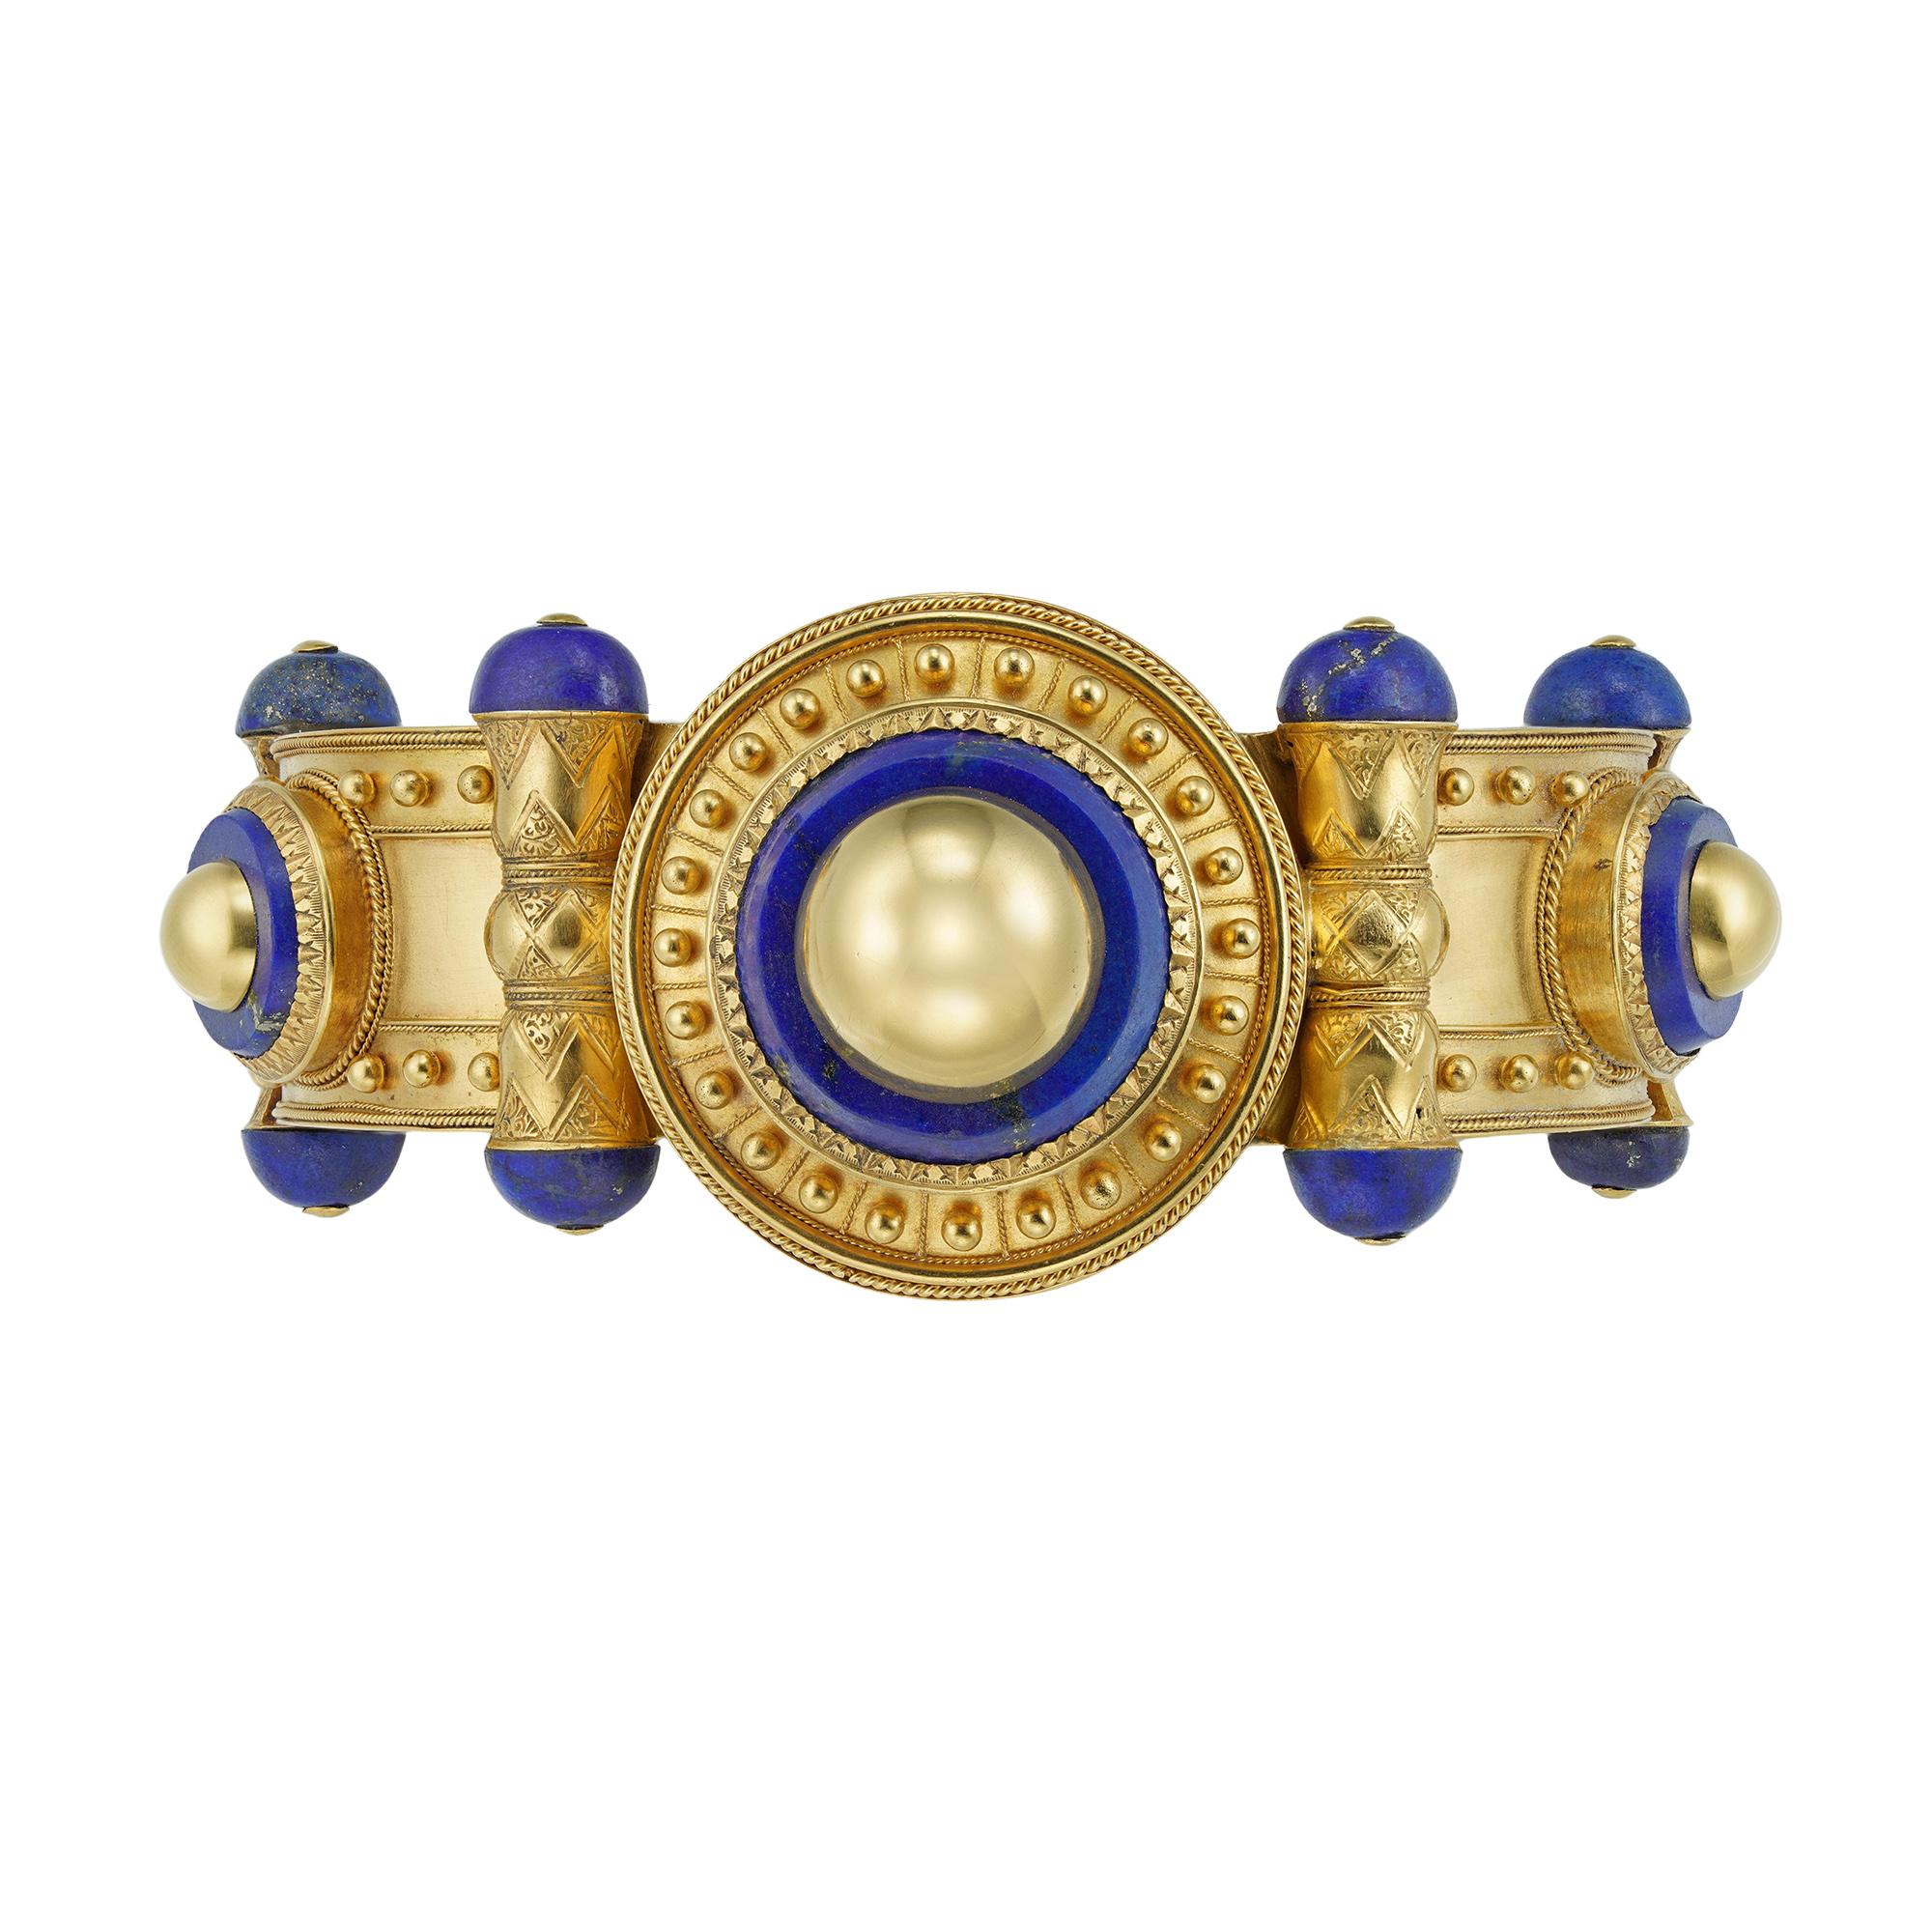 An Important gold and lapis bangle by Cartier, set to the centre with a gold dome inlayed in a lapis plaque, surrounded by Etruscan style wire and bead-work decorations, the hinged bangle composed of four panels each bearing a smaller gold dome